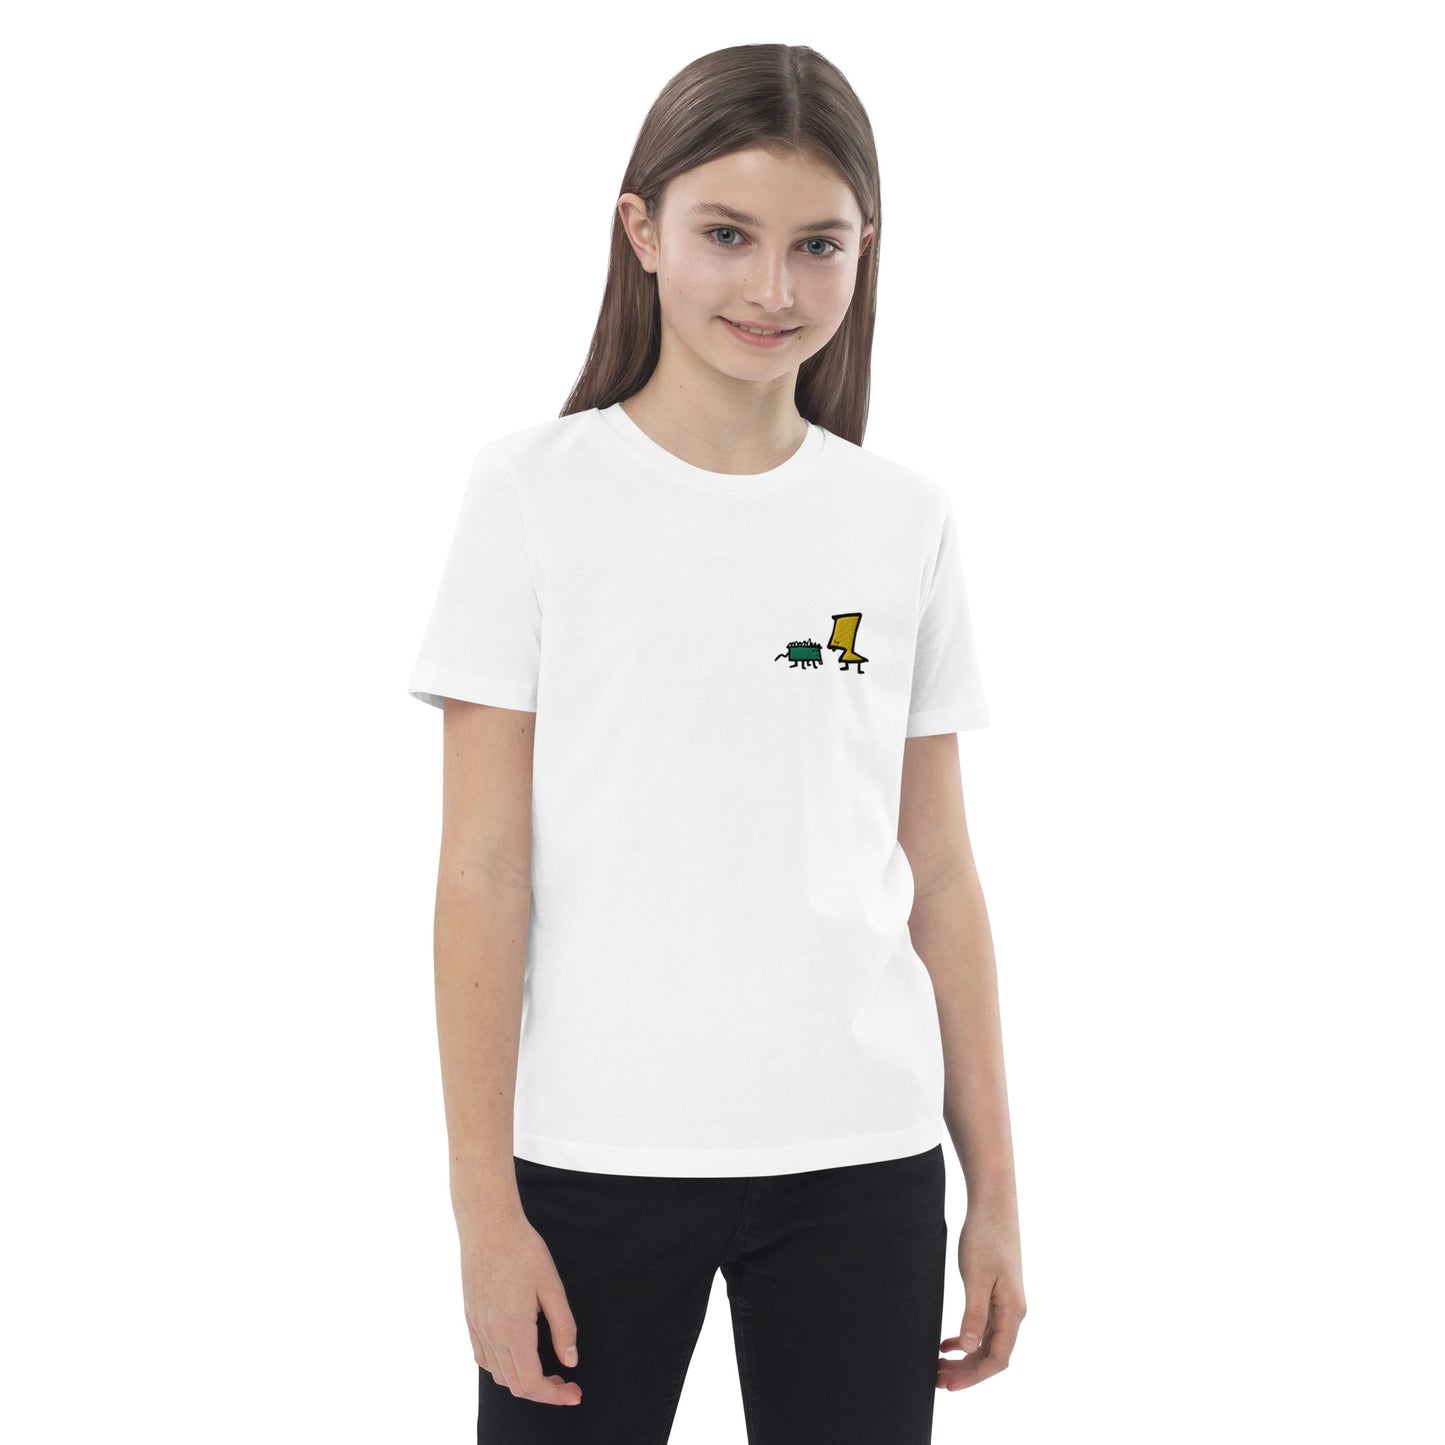 Organic cotton kids t-shirt - Lime and Limon Embroidery